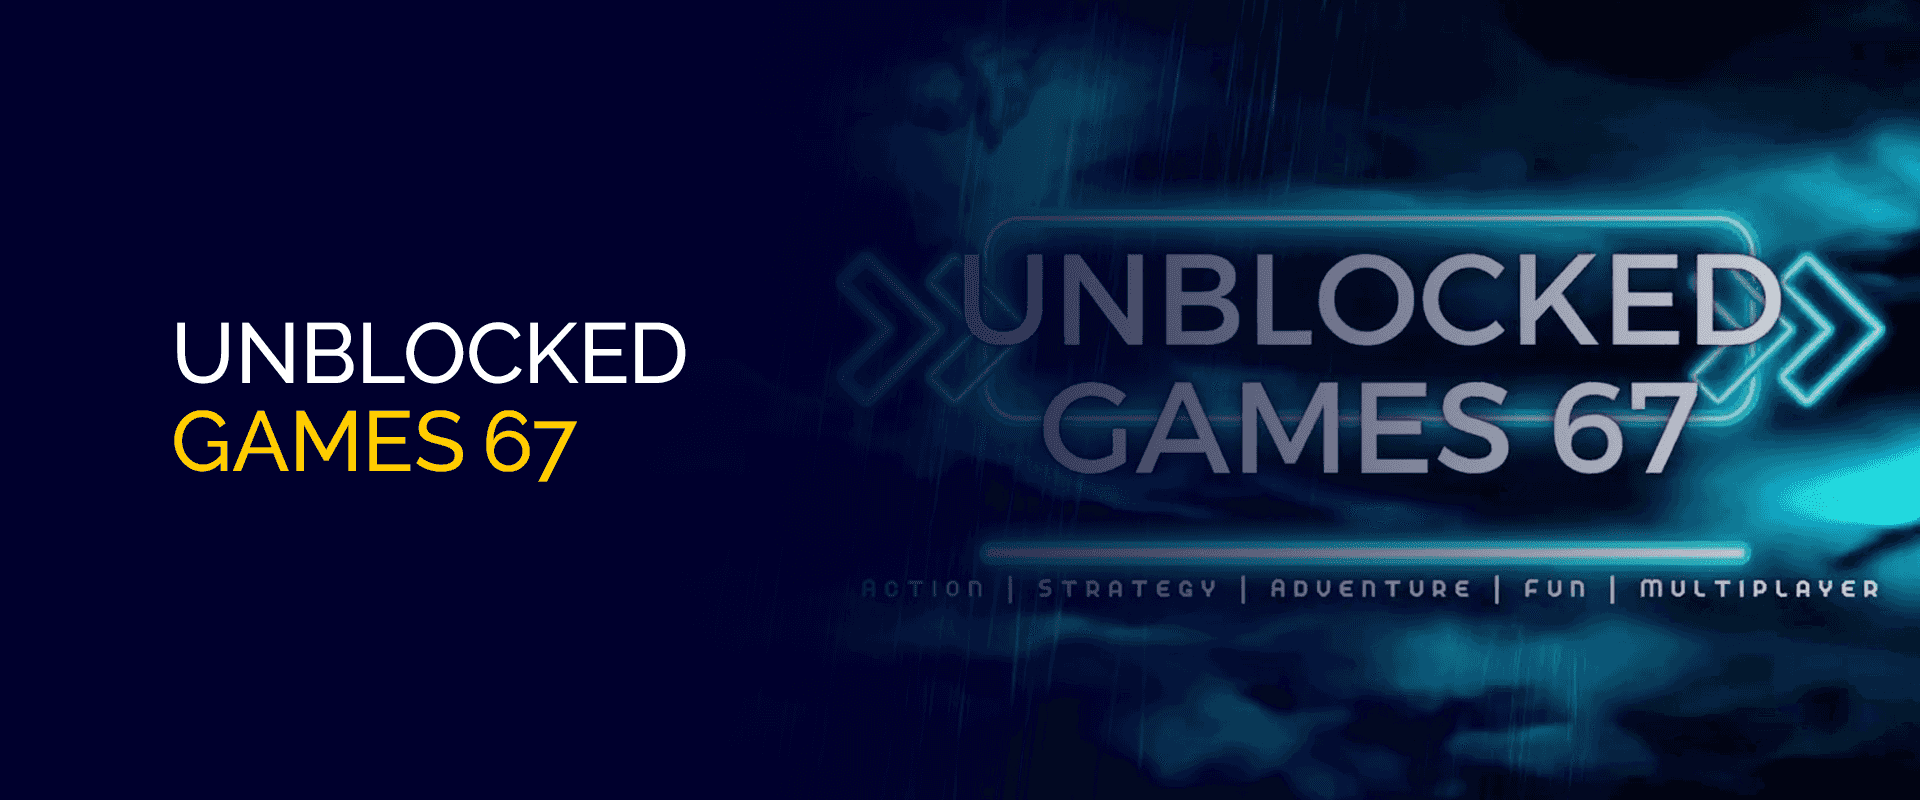 Unblocked Games 67: A definitive Manual for Getting to and Messing around  at School - tech tolk - Medium